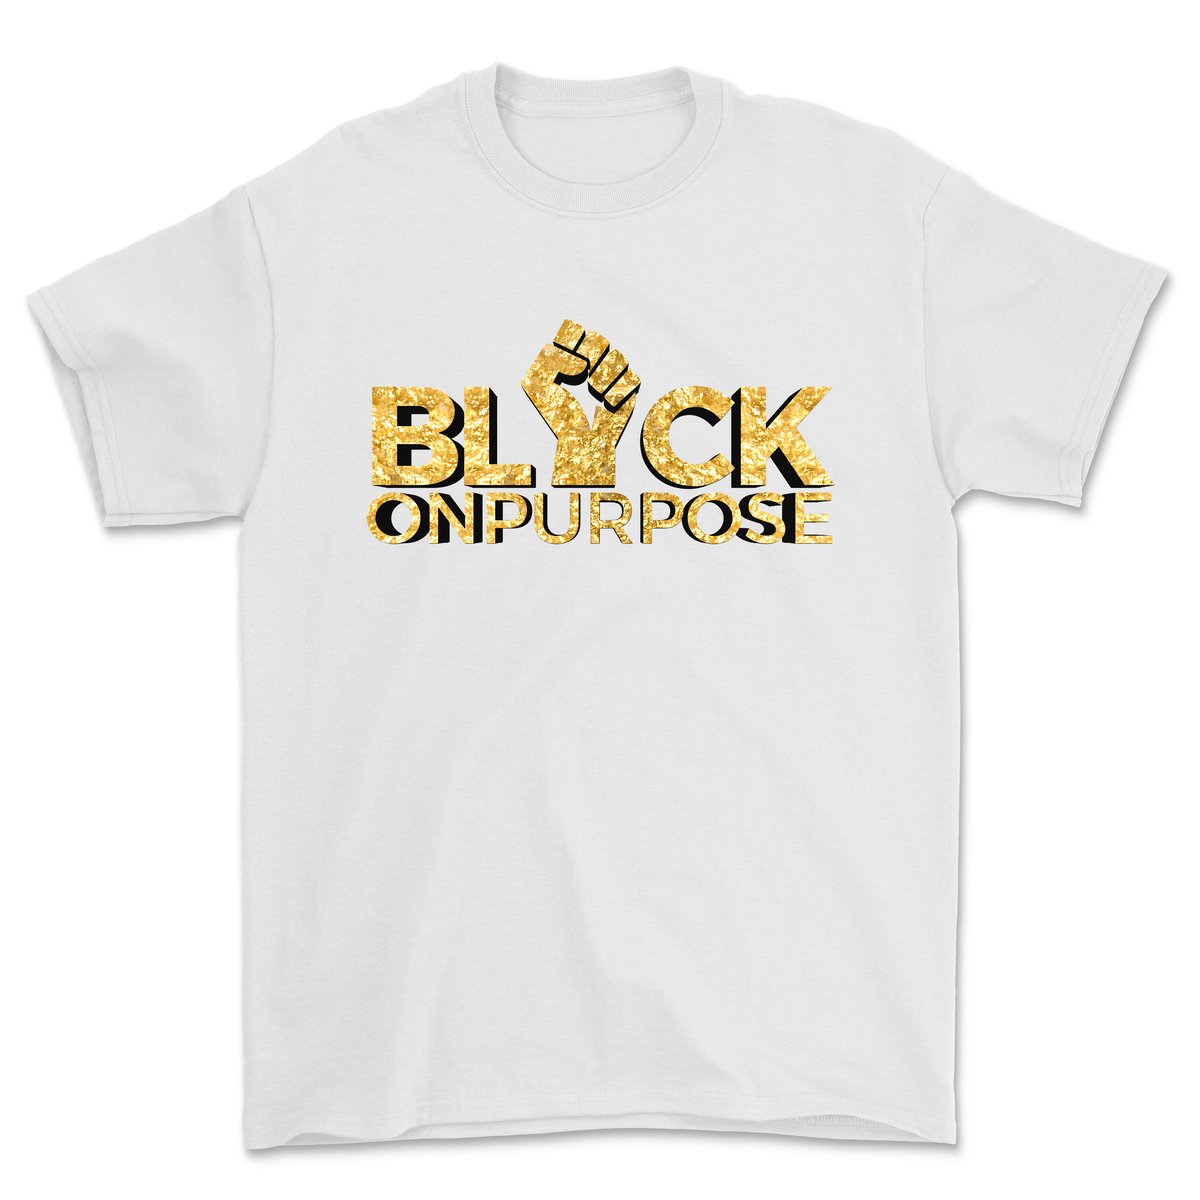 Image of Adult White Gold "Black On Purpose" Tee